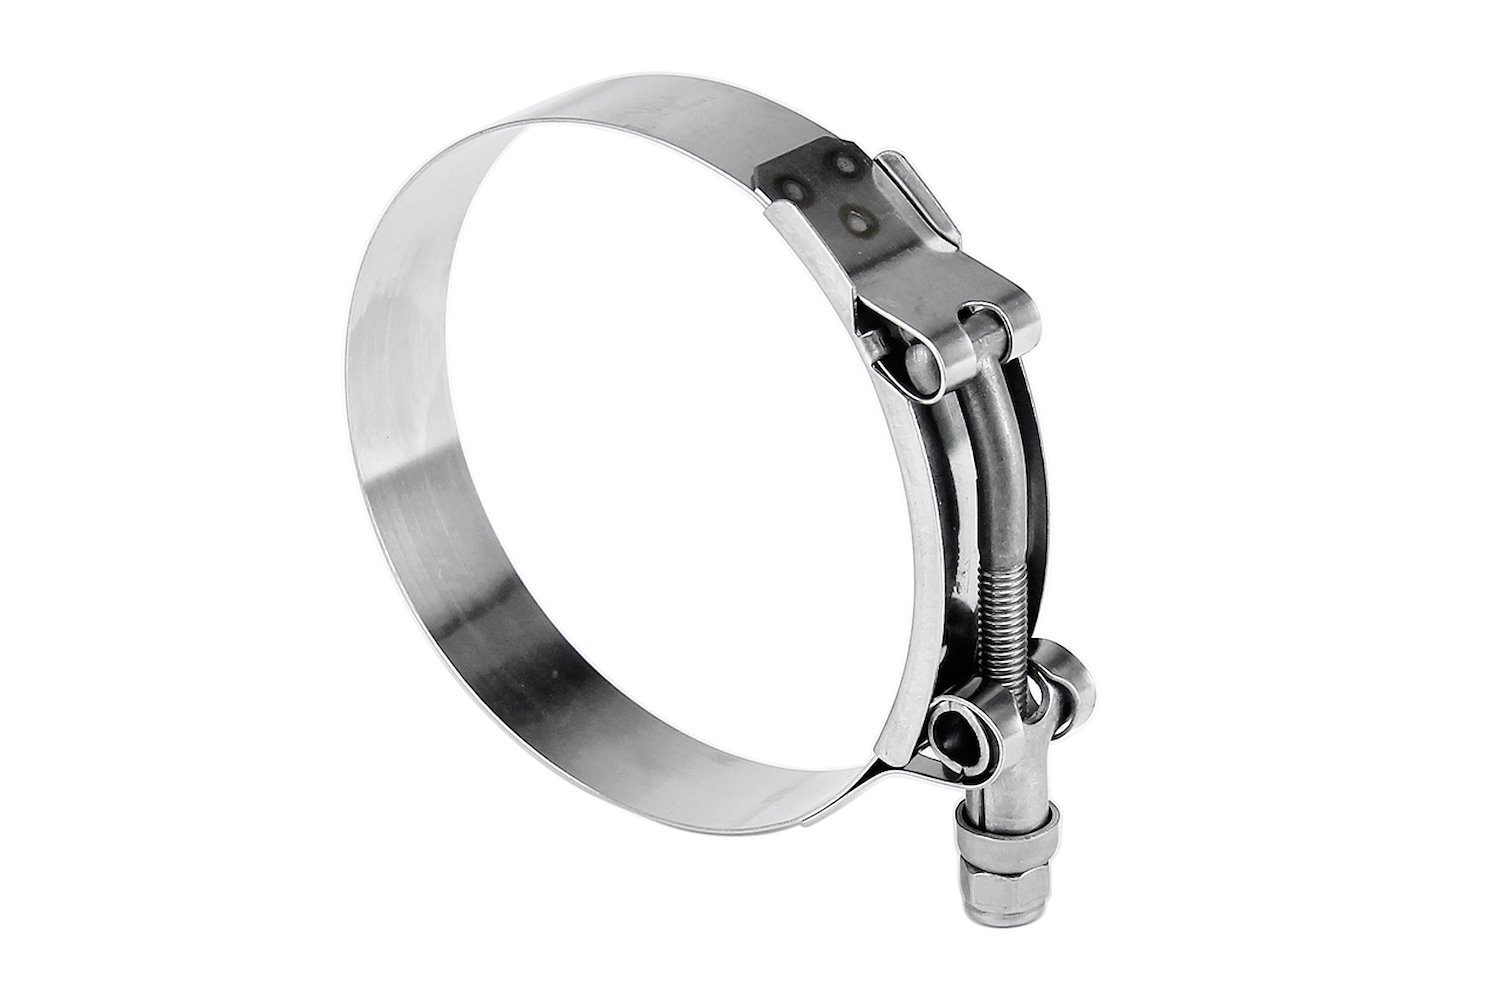 316-SSTC-133-141 100-Percent Marine Grade Stainless Steel T-Bolt Hose Clamp, Size #140, Range: 5.24 in.- 5.55 in.